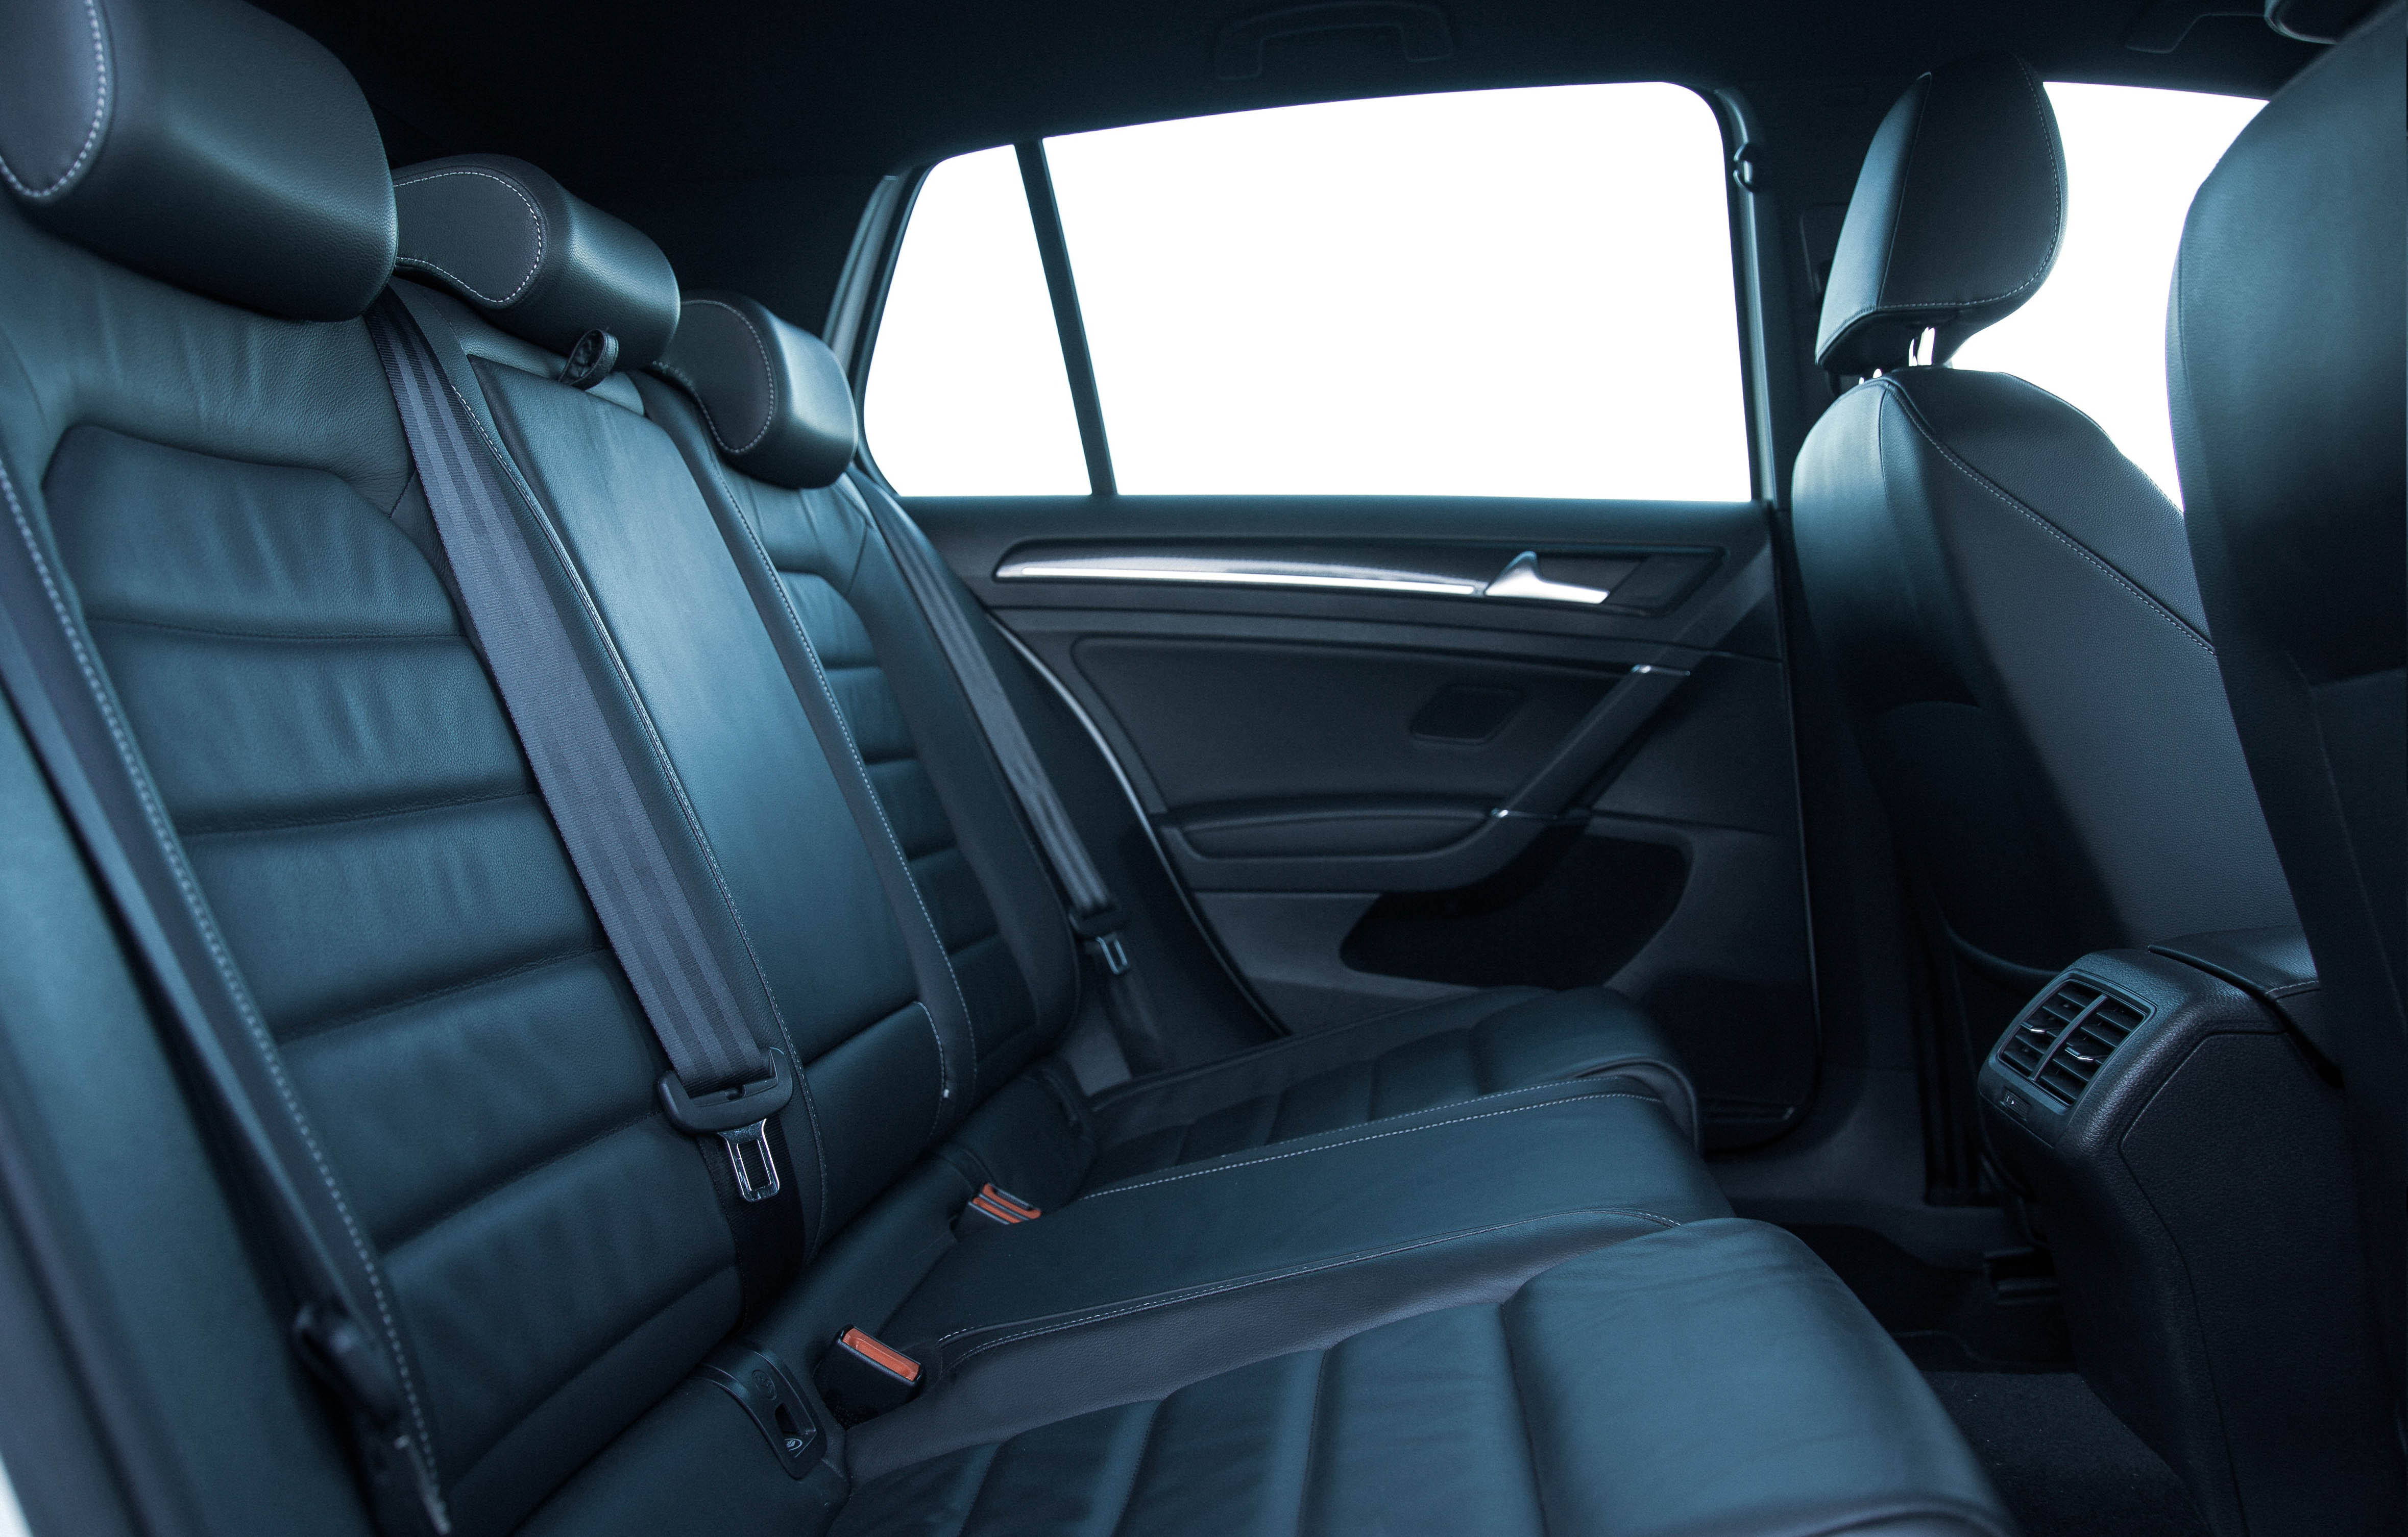 Car service interior leather seating